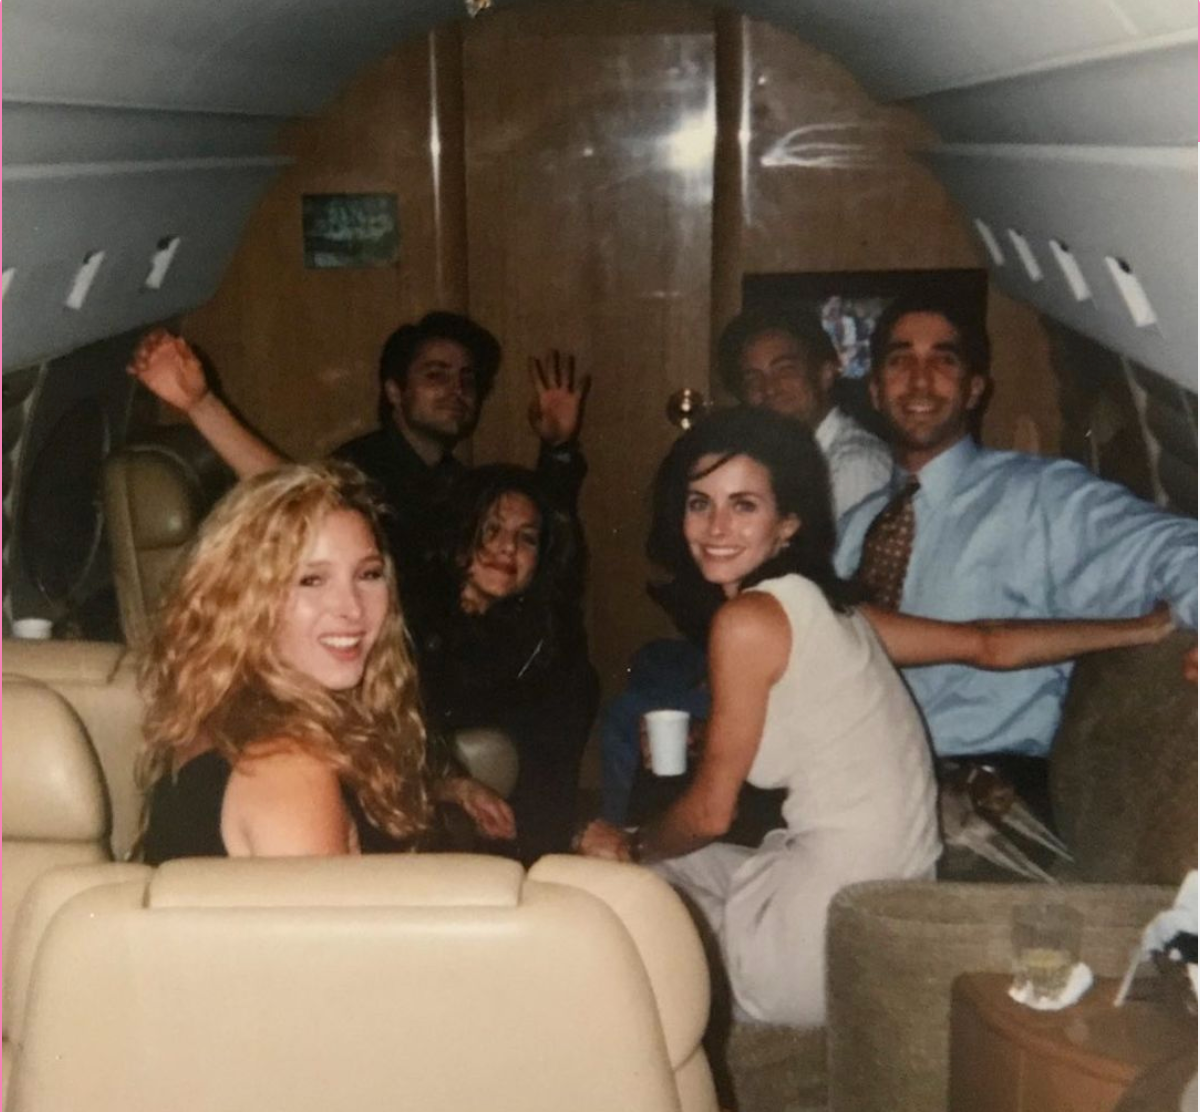 The cast of Friends on a private jet